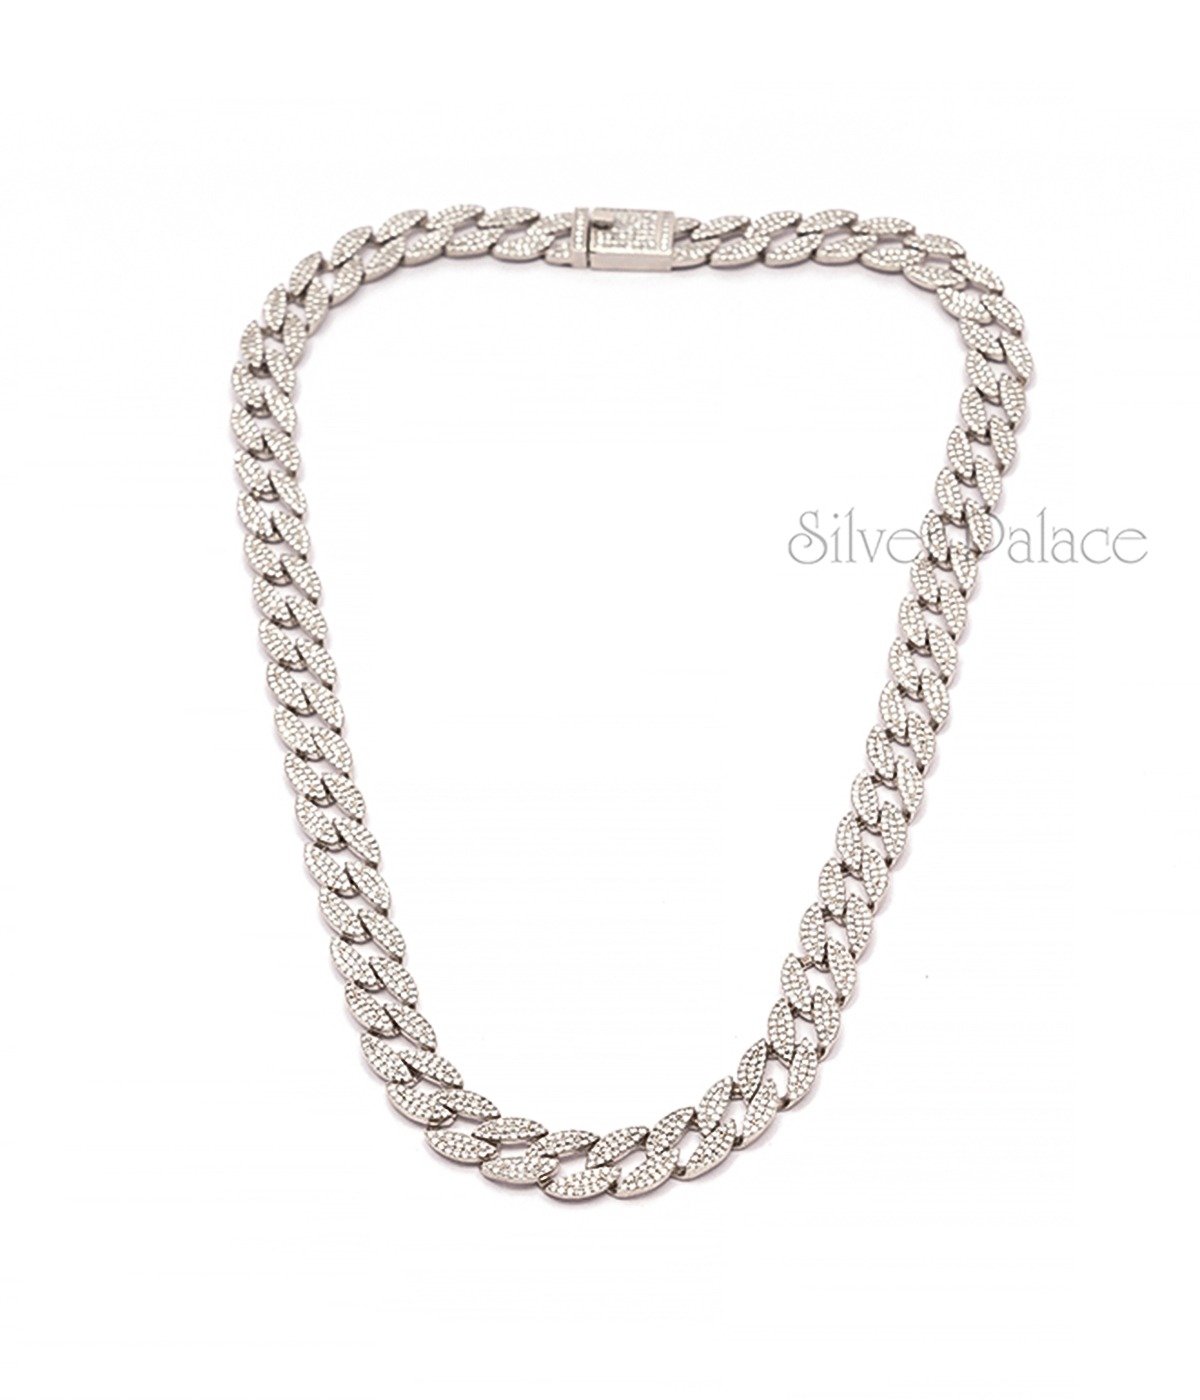 92.5 STERLING SILVER LINK TINY STONE STUDDED CHAIN